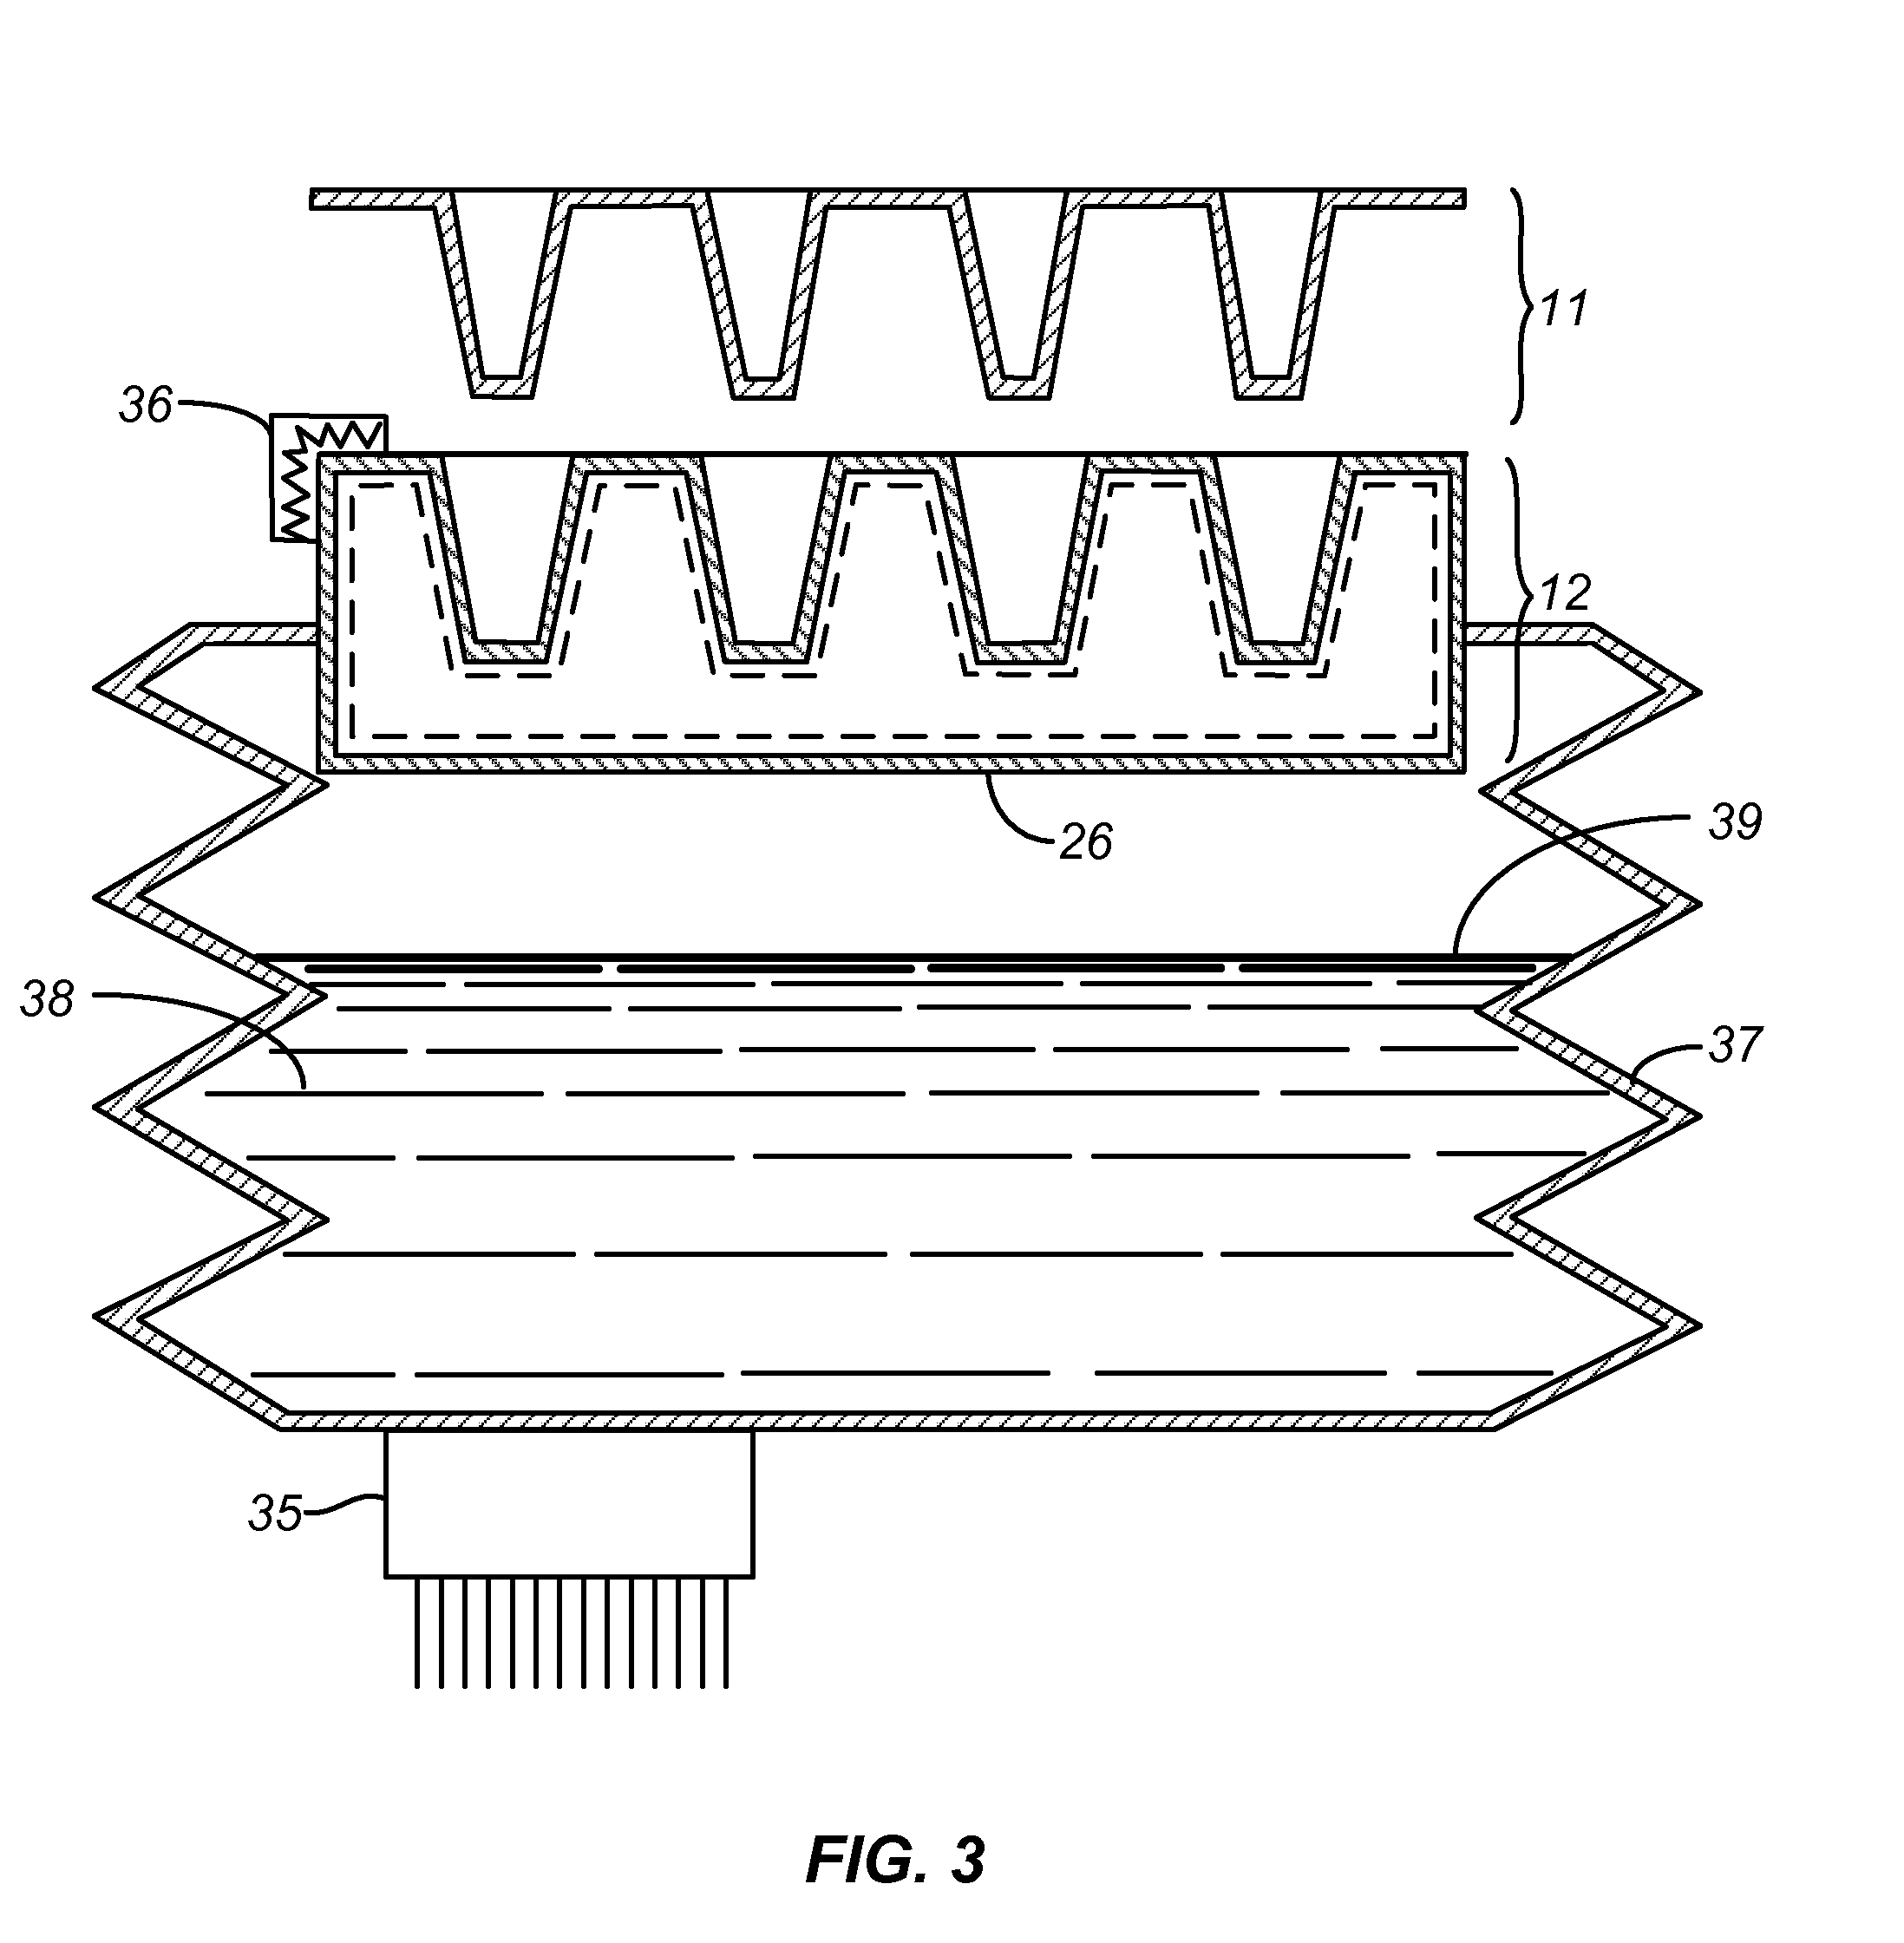 Thermal cycler with vapor chamber for rapid temperature changes